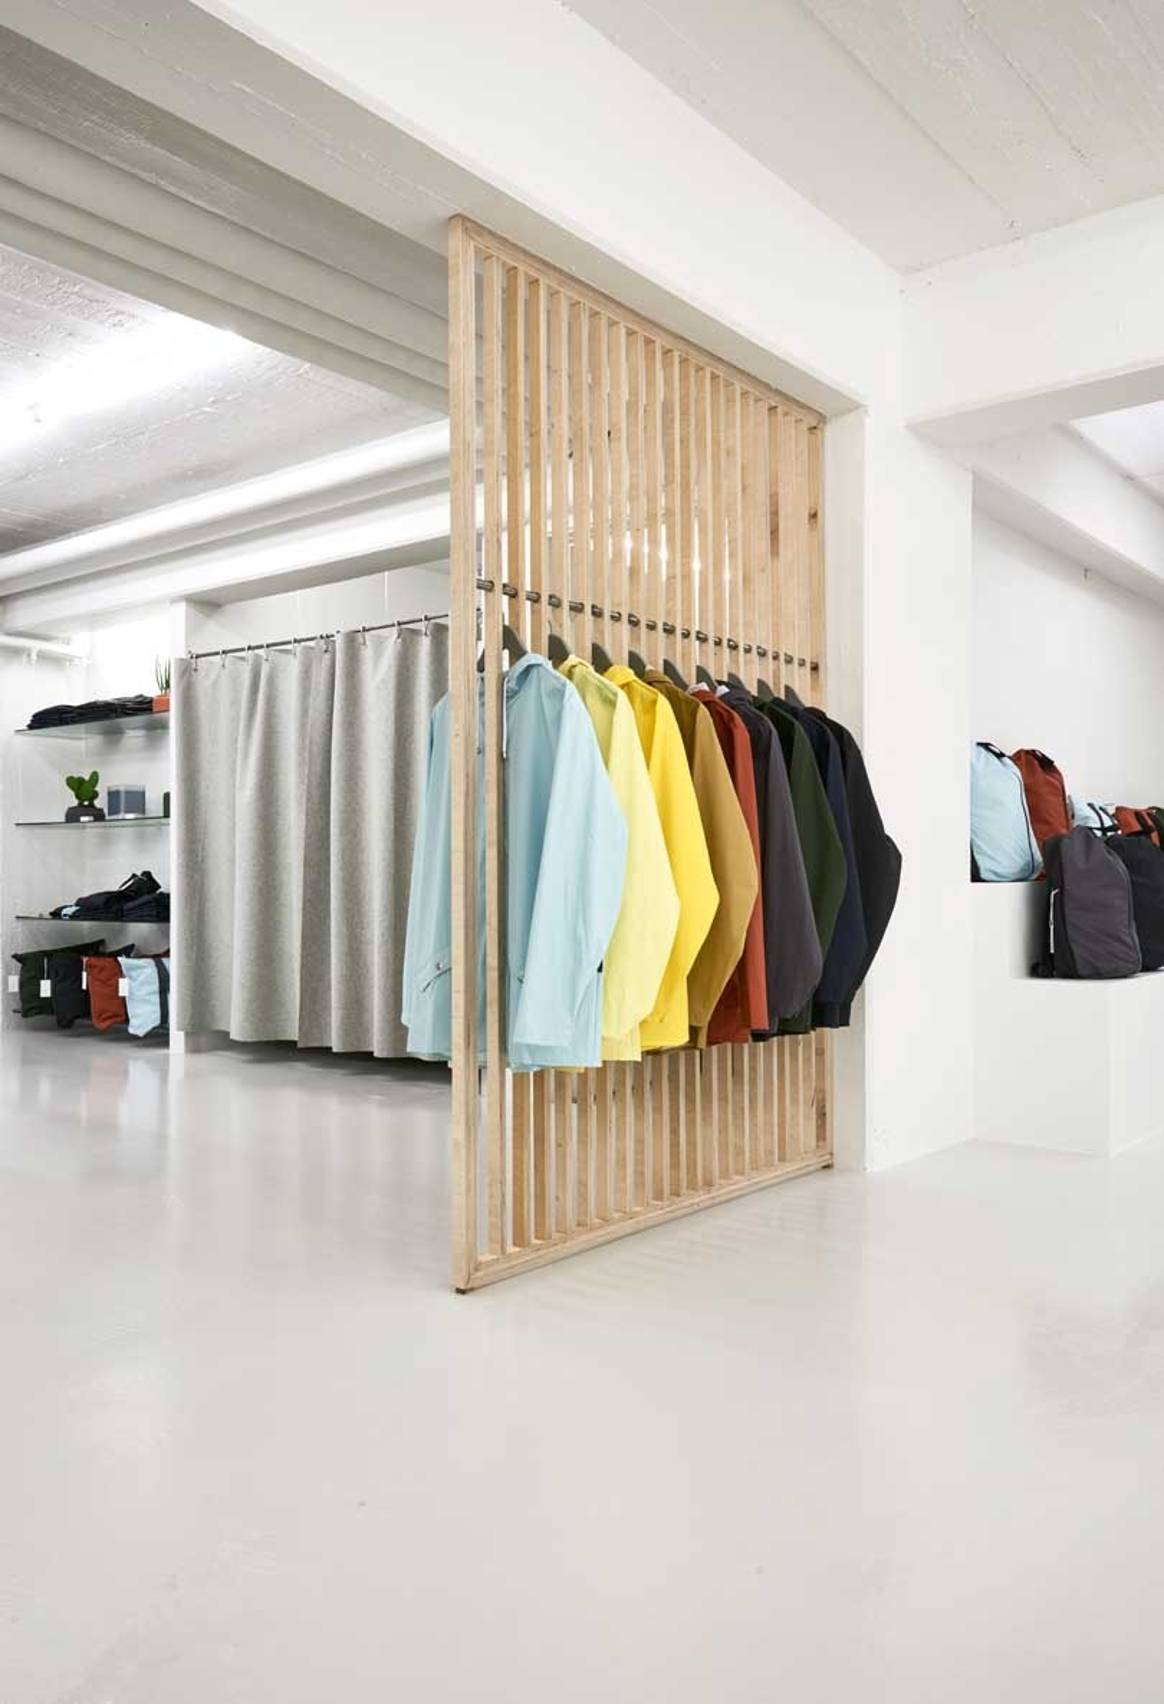 Rains opent concept store in Amsterdam